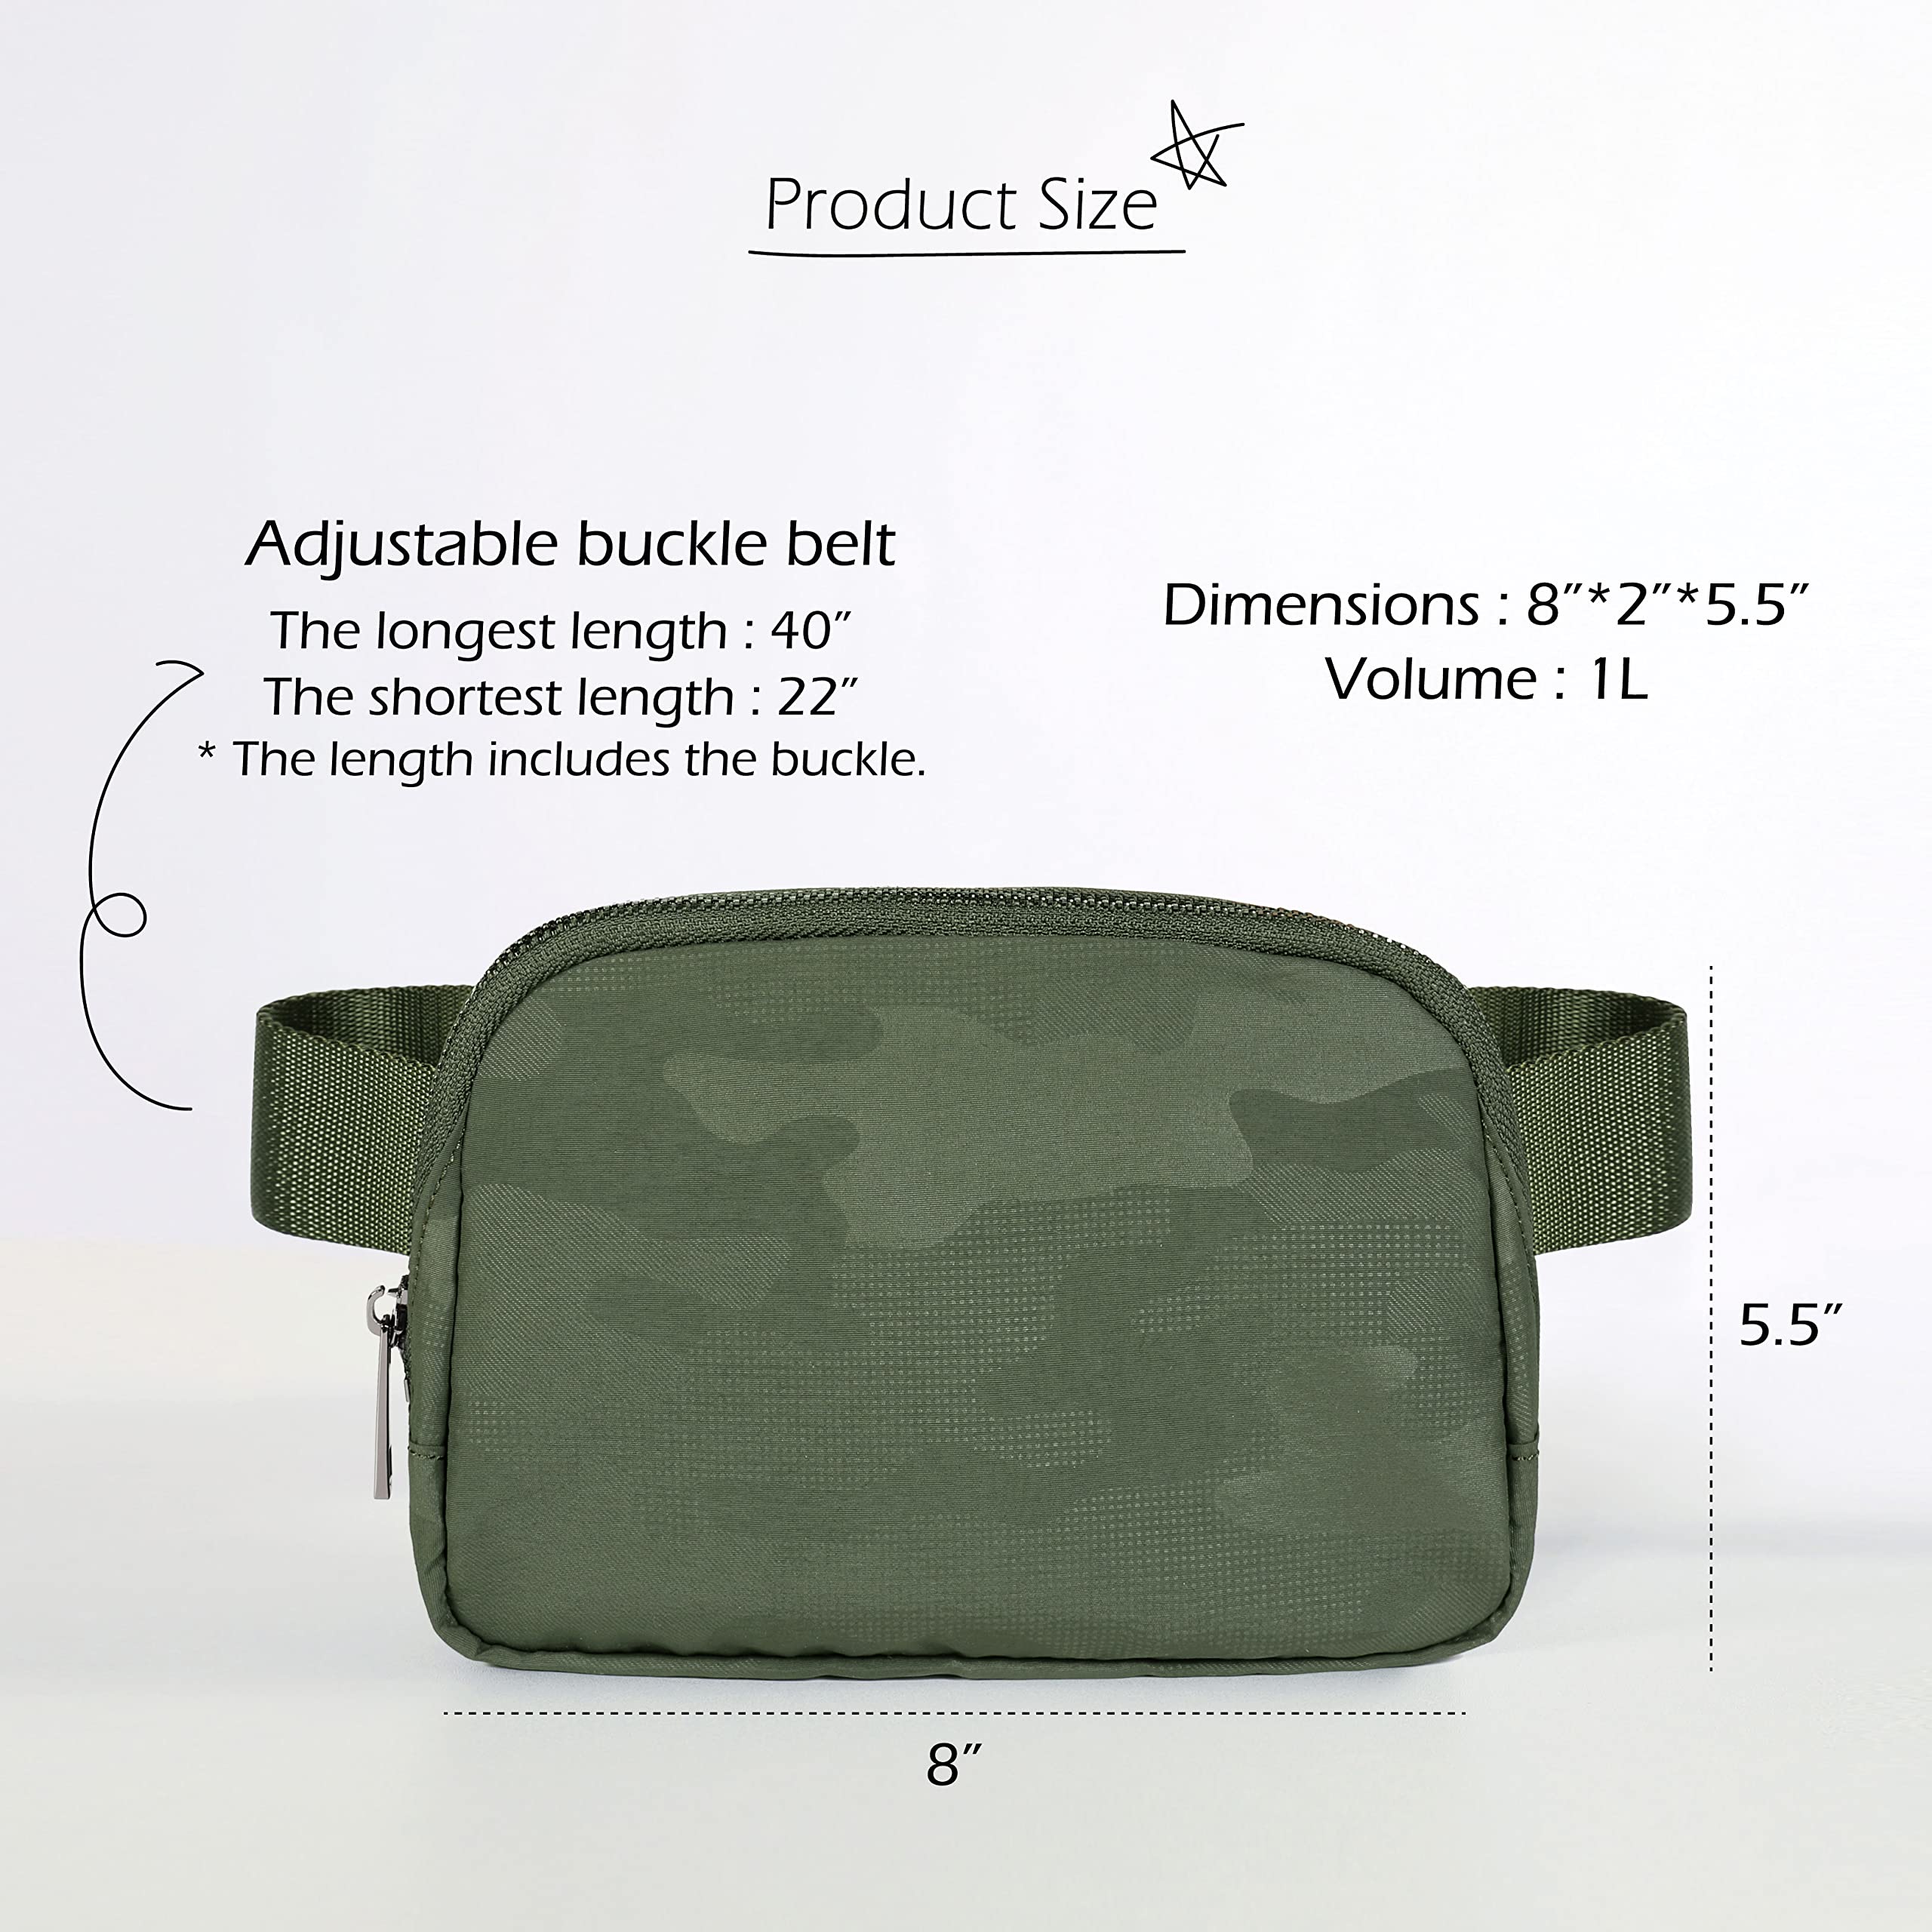 ODODOS Unisex Mini Belt Bag with Adjustable Strap Small Waist Pouch for Workout Running Traveling Hiking, Camo Green